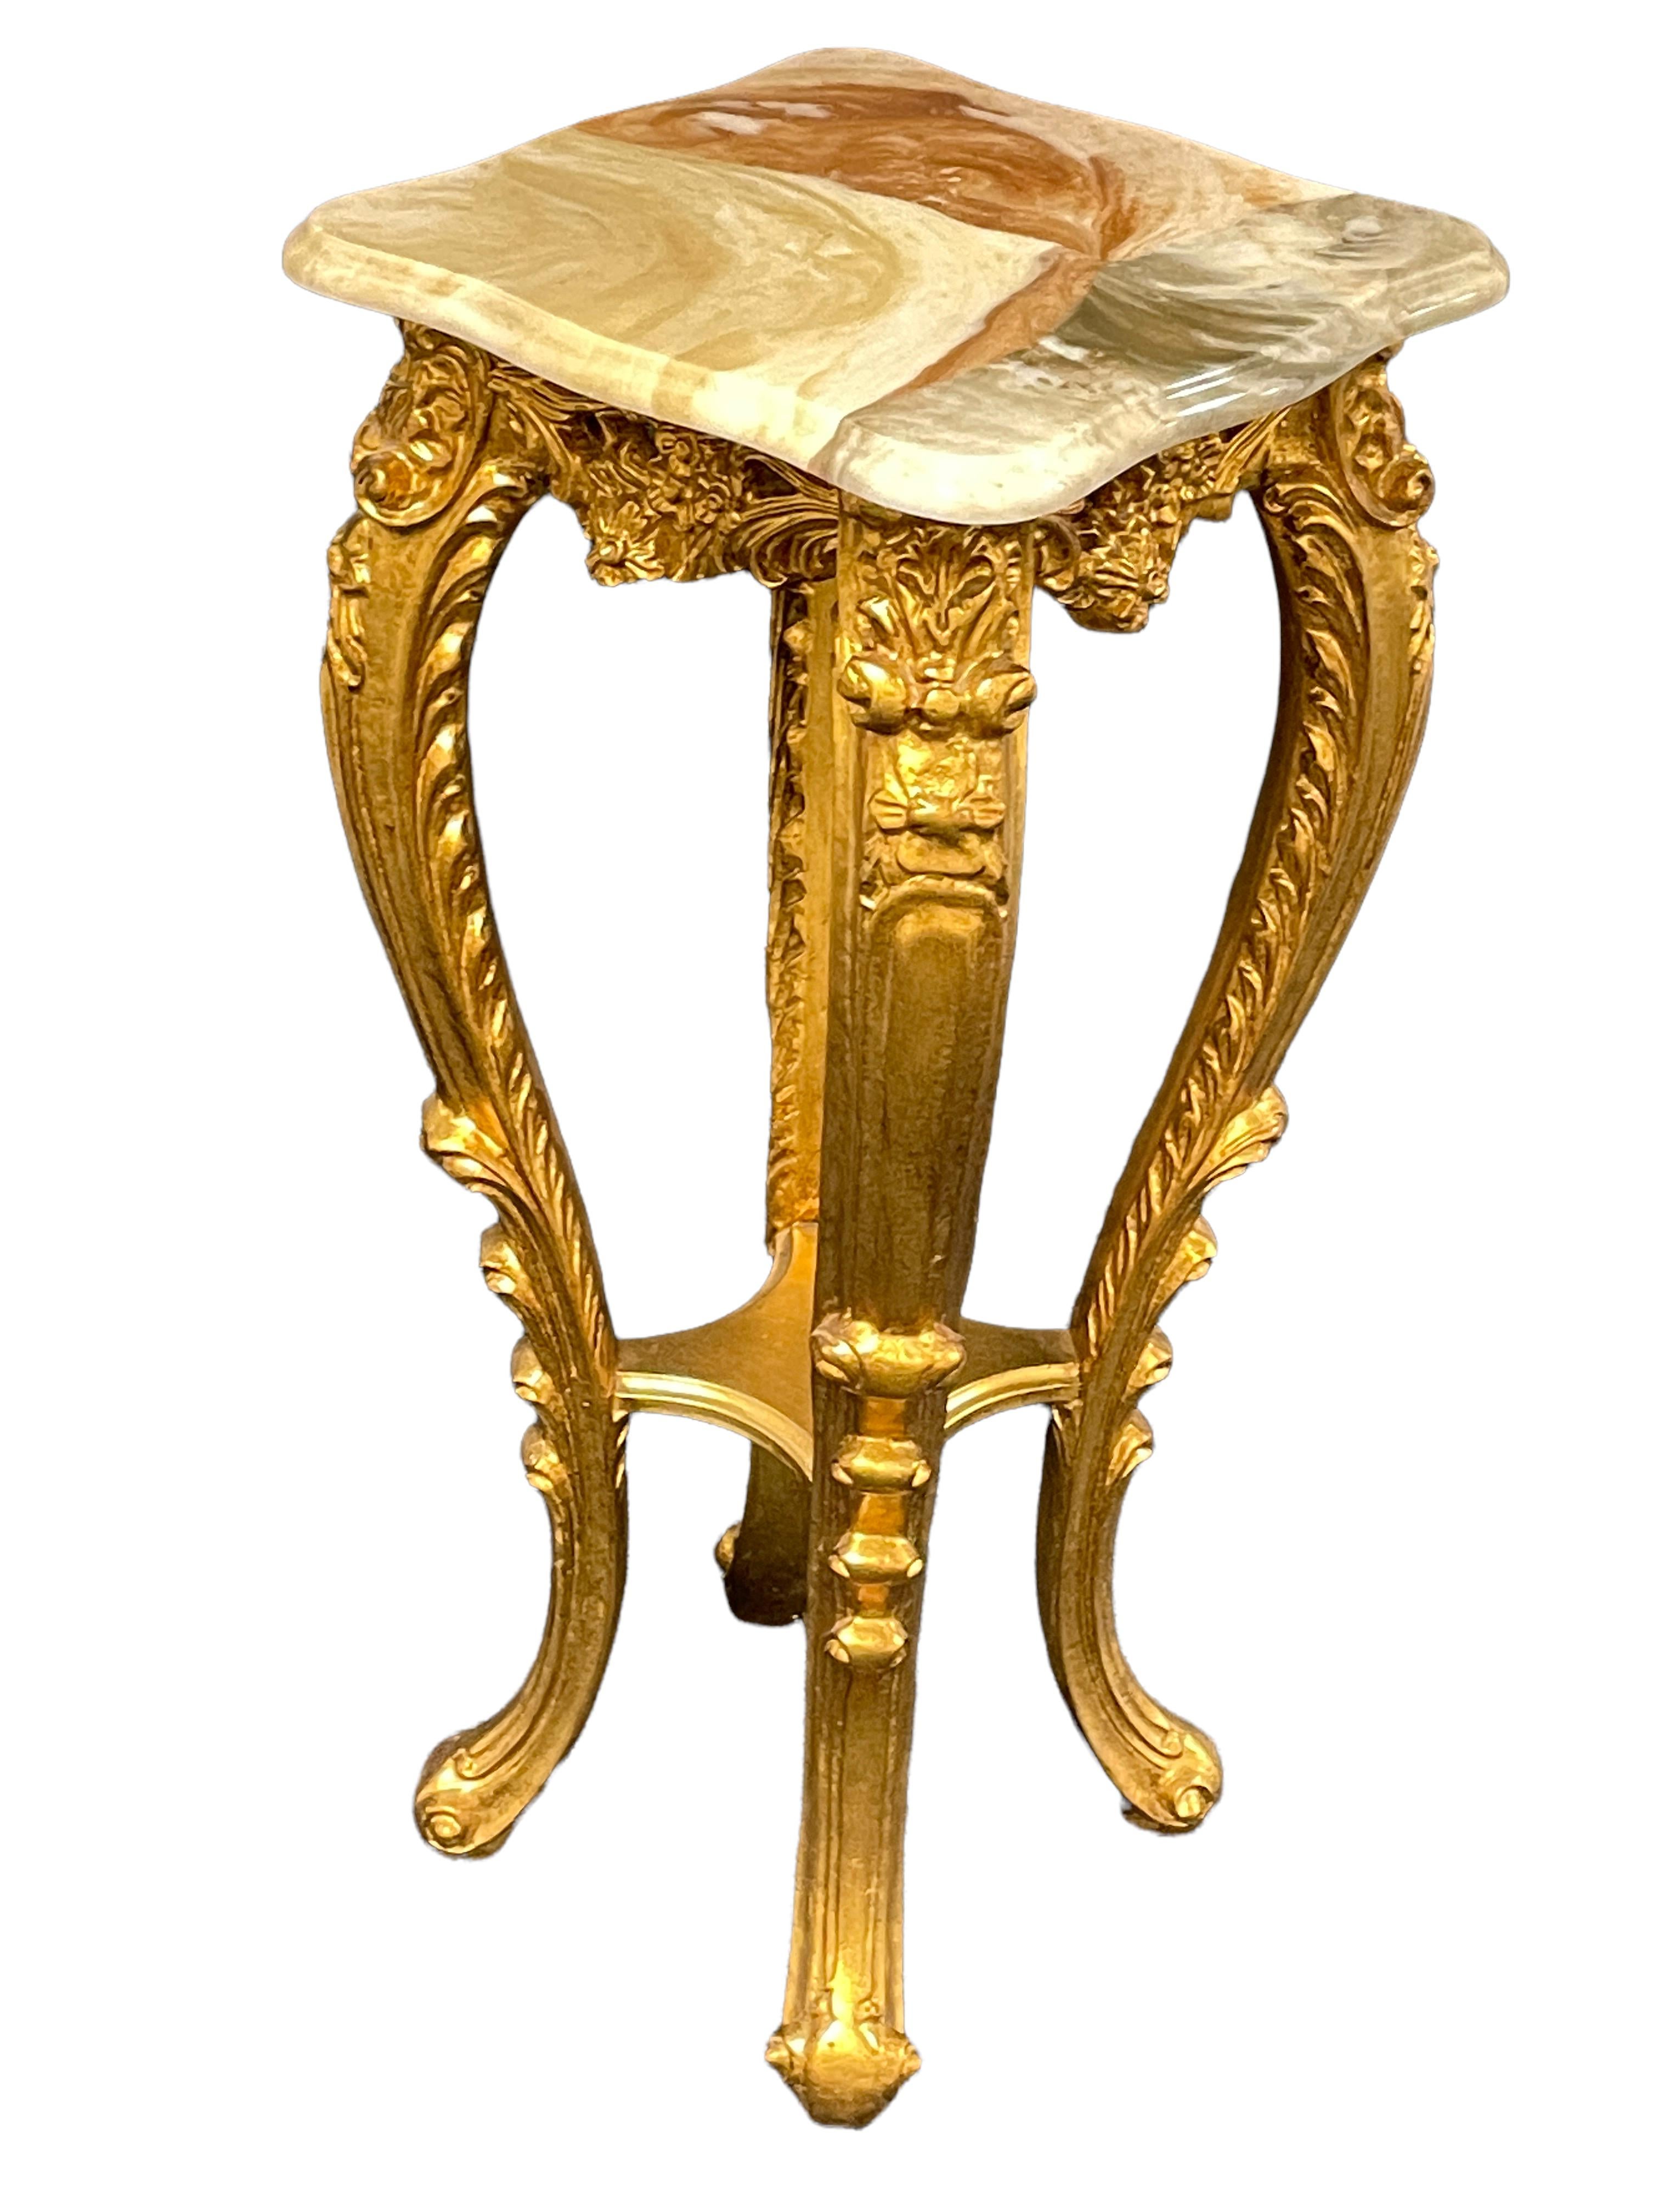 20th Century Carved Gilt Wood Toleware Console Pedestal Table, Italy For Sale 2